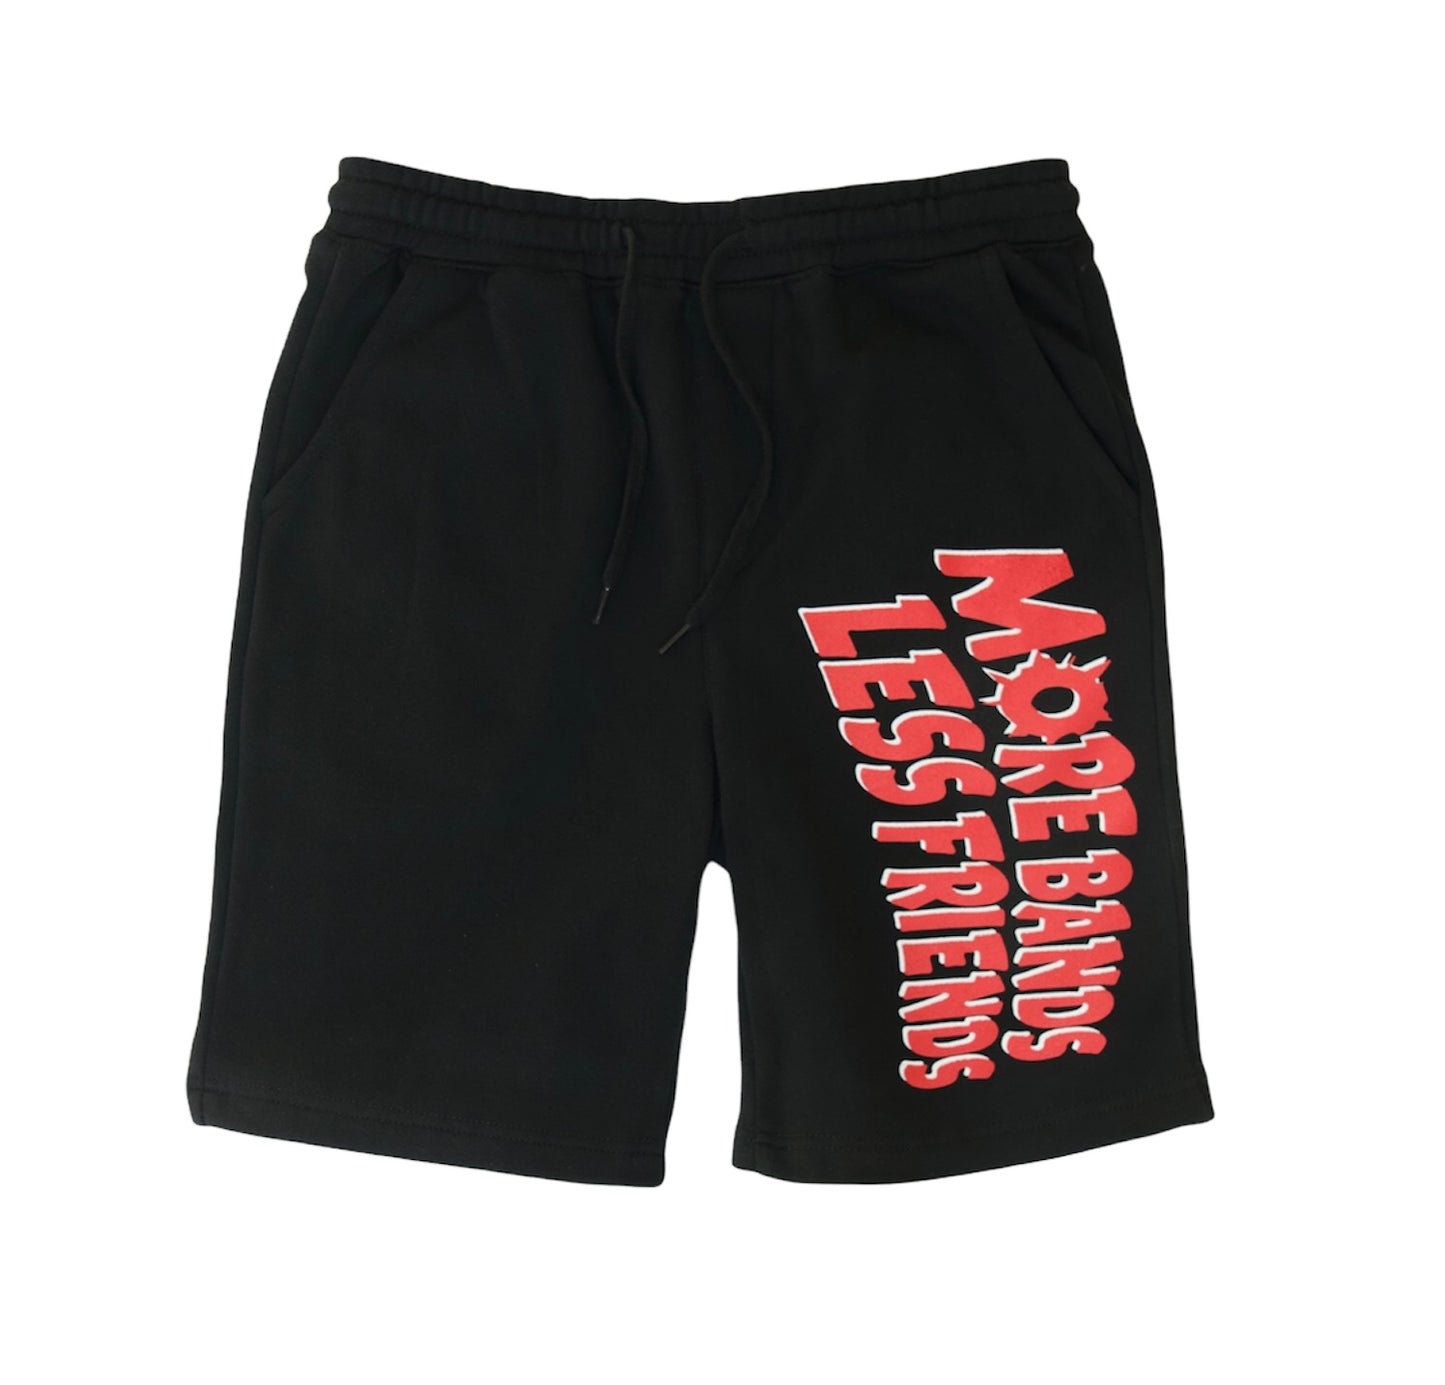 Black "Red More Bands Less Friends" Fleece Shorts